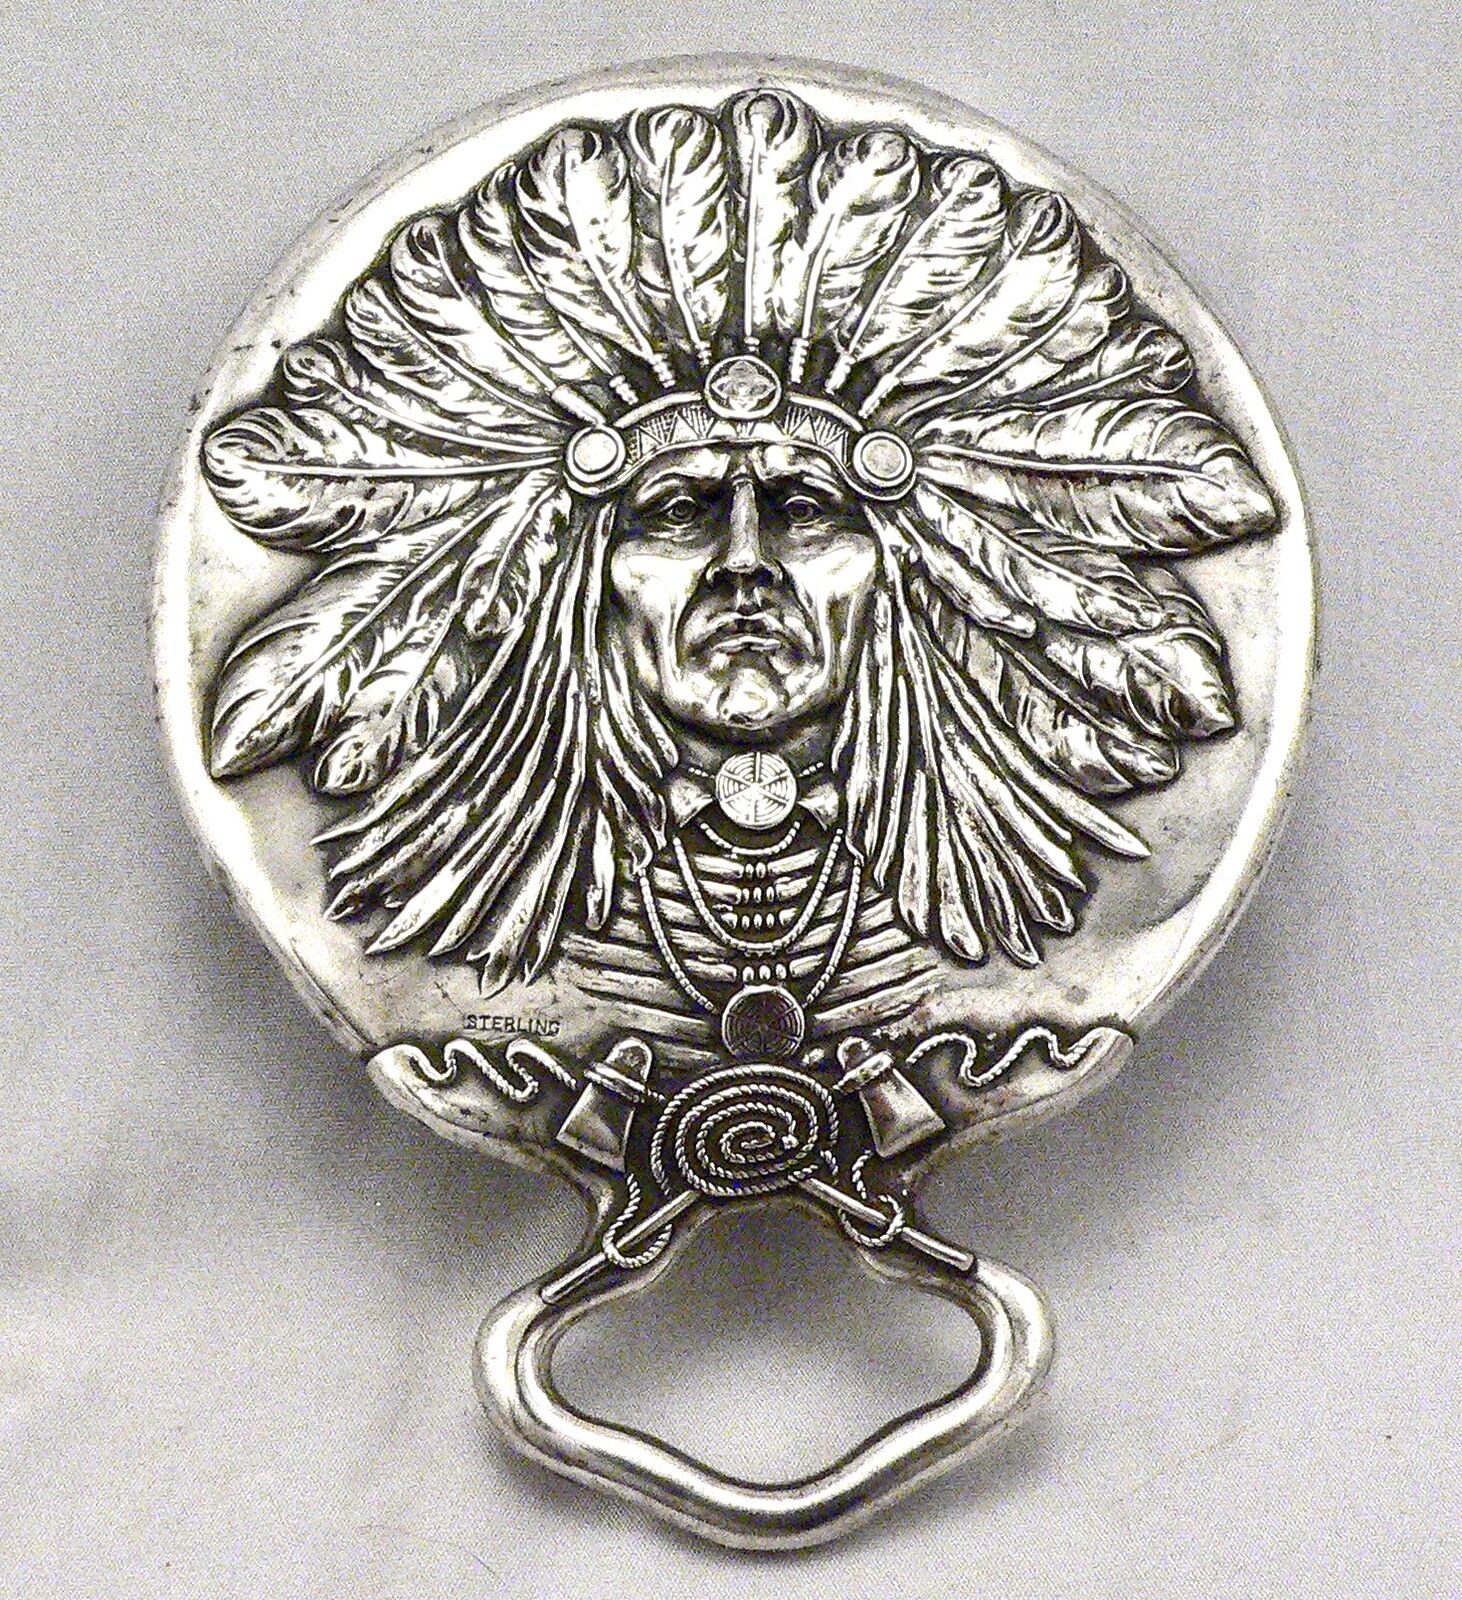 Antique c1900 UNGER BROTHERS STERLING Silver Indian Chief Hand MIRROR Unger Bros